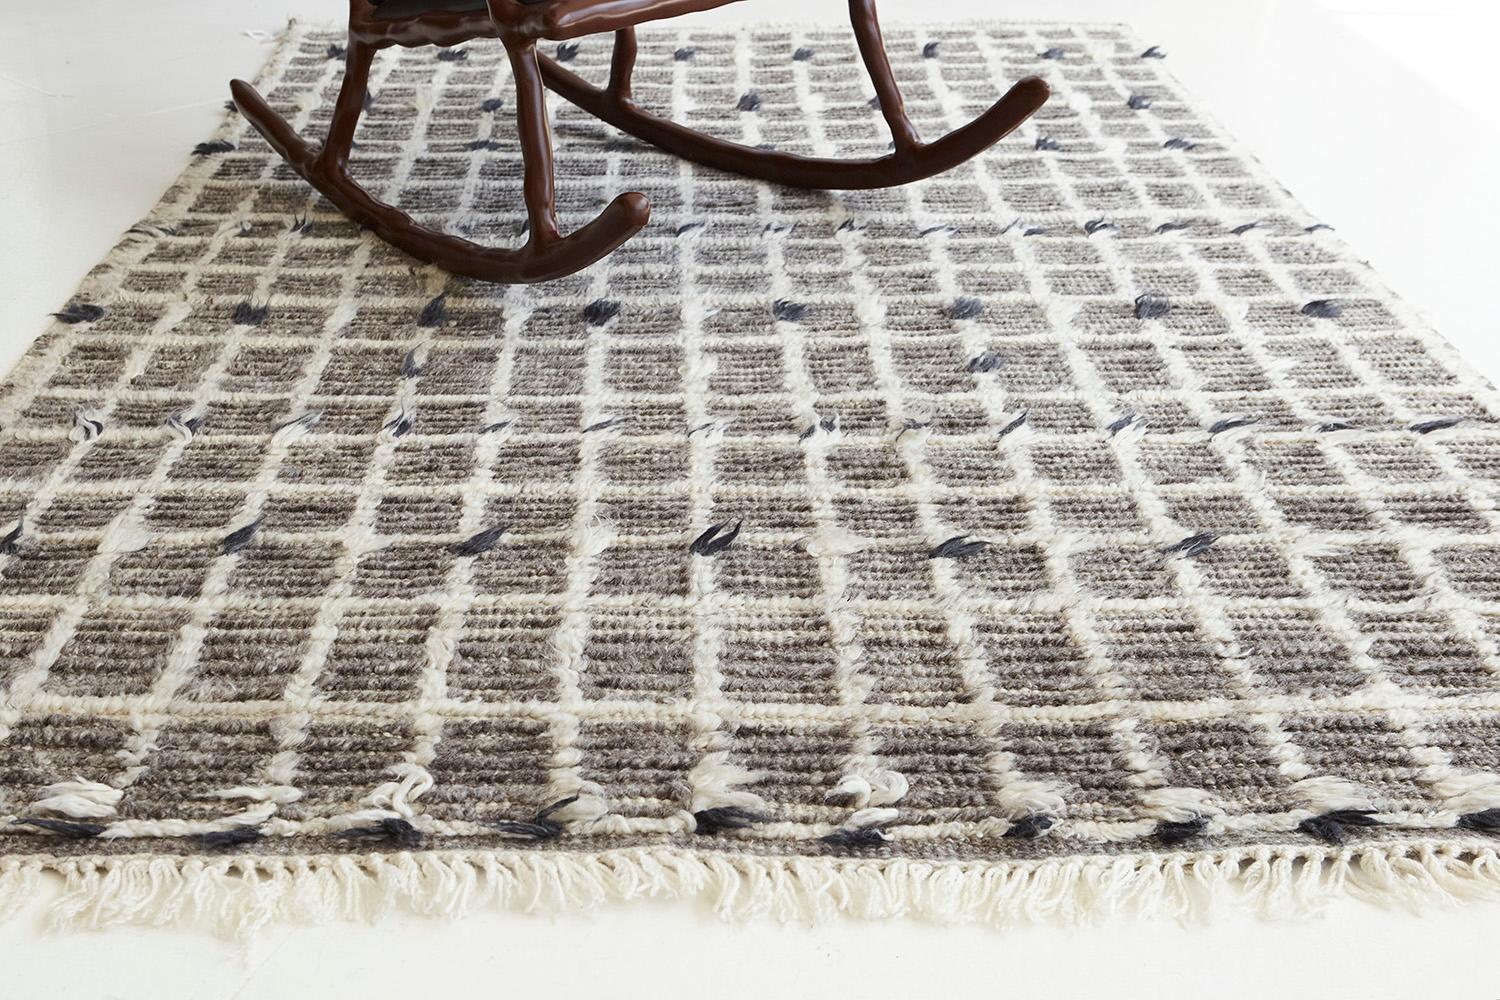 Amihan is a beautifully detailed pile weave from our Atlas Collection. The delicate checkered and ribbed style rug with charcoal and ash tones gives a rich and charming feel. Repeating ash pile detailing also brings a bold and noteworthy uniqueness